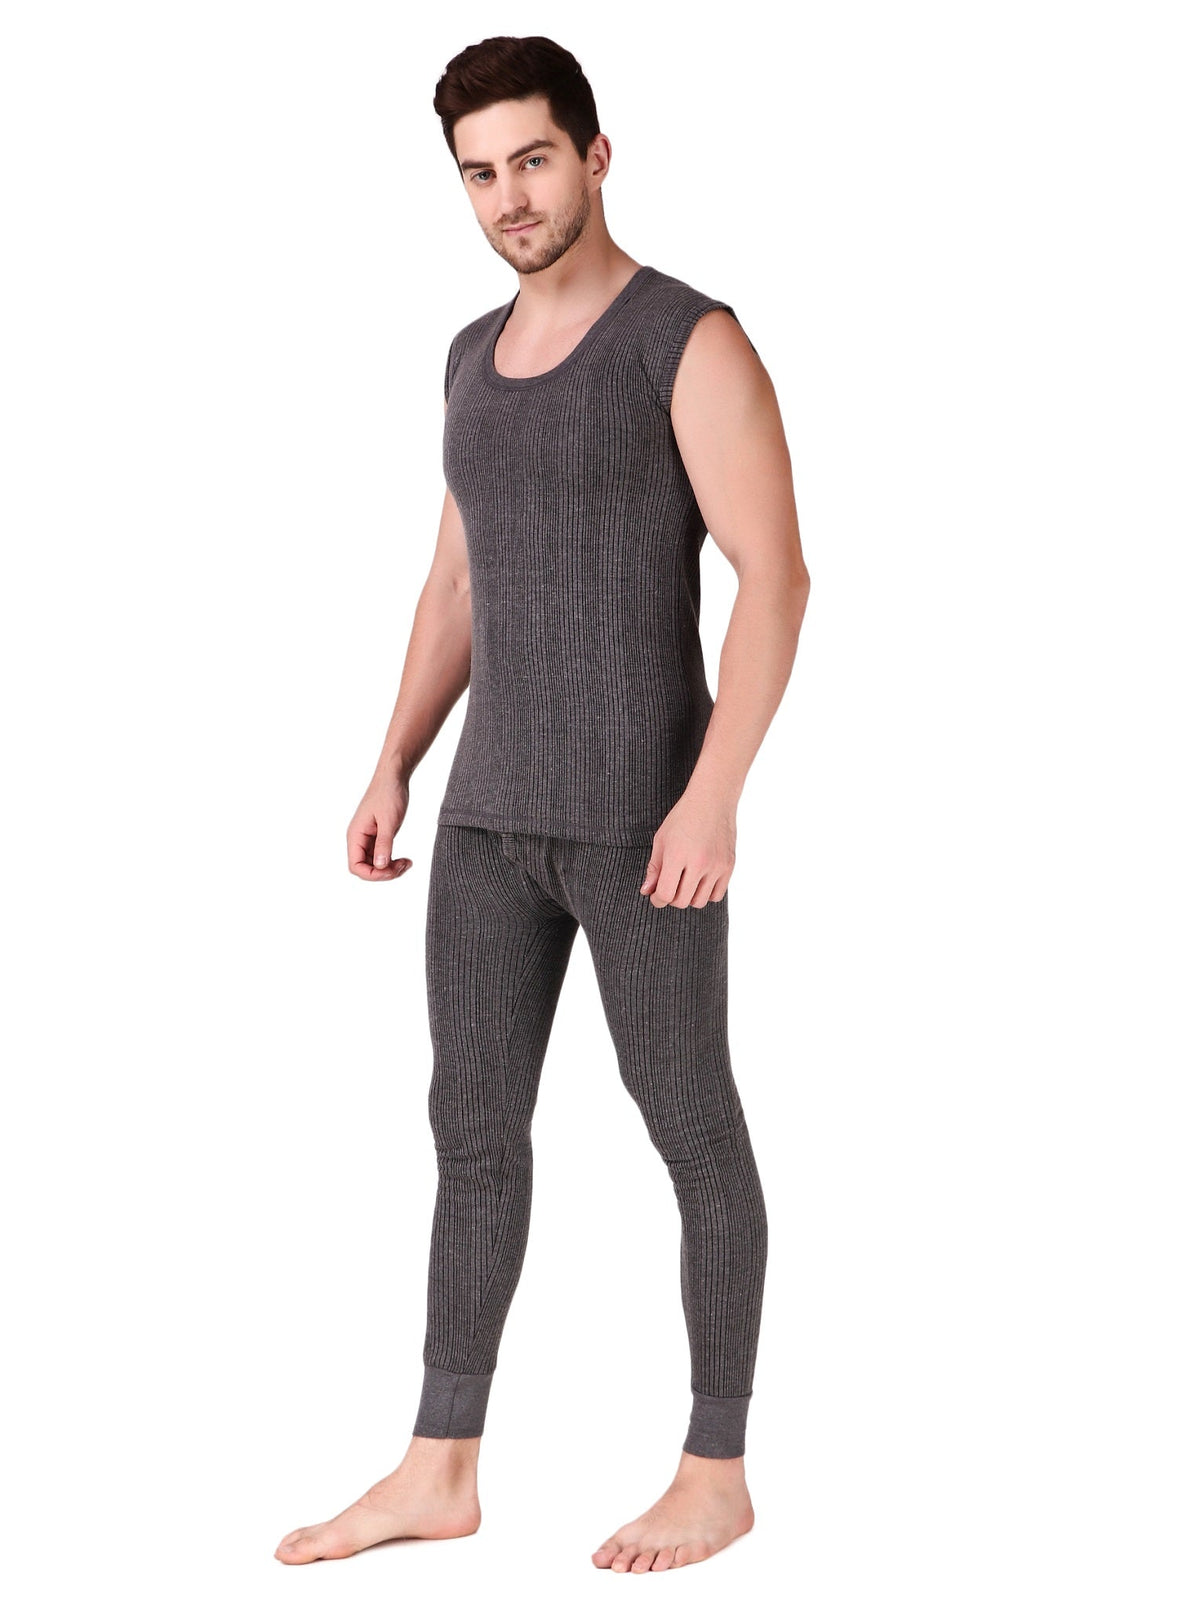 MEN'S SLEEVELESS COTTON THERMAL SET ( ROUND NECK VEST AND TROUSER)